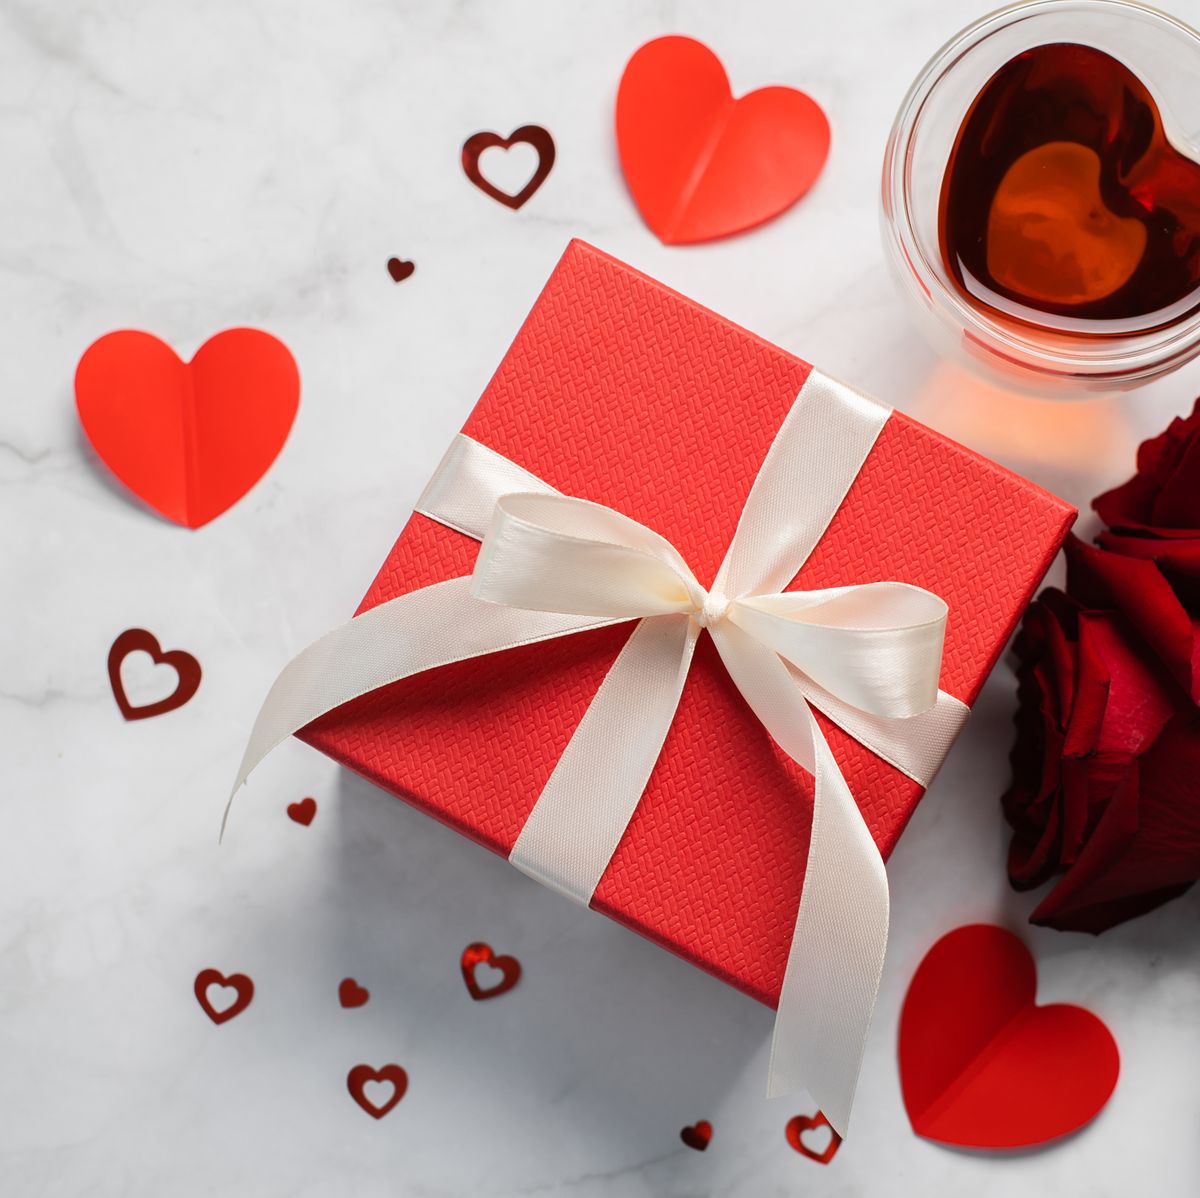 Free Photo  Valentines gifts, vintage romantic red heart gifts